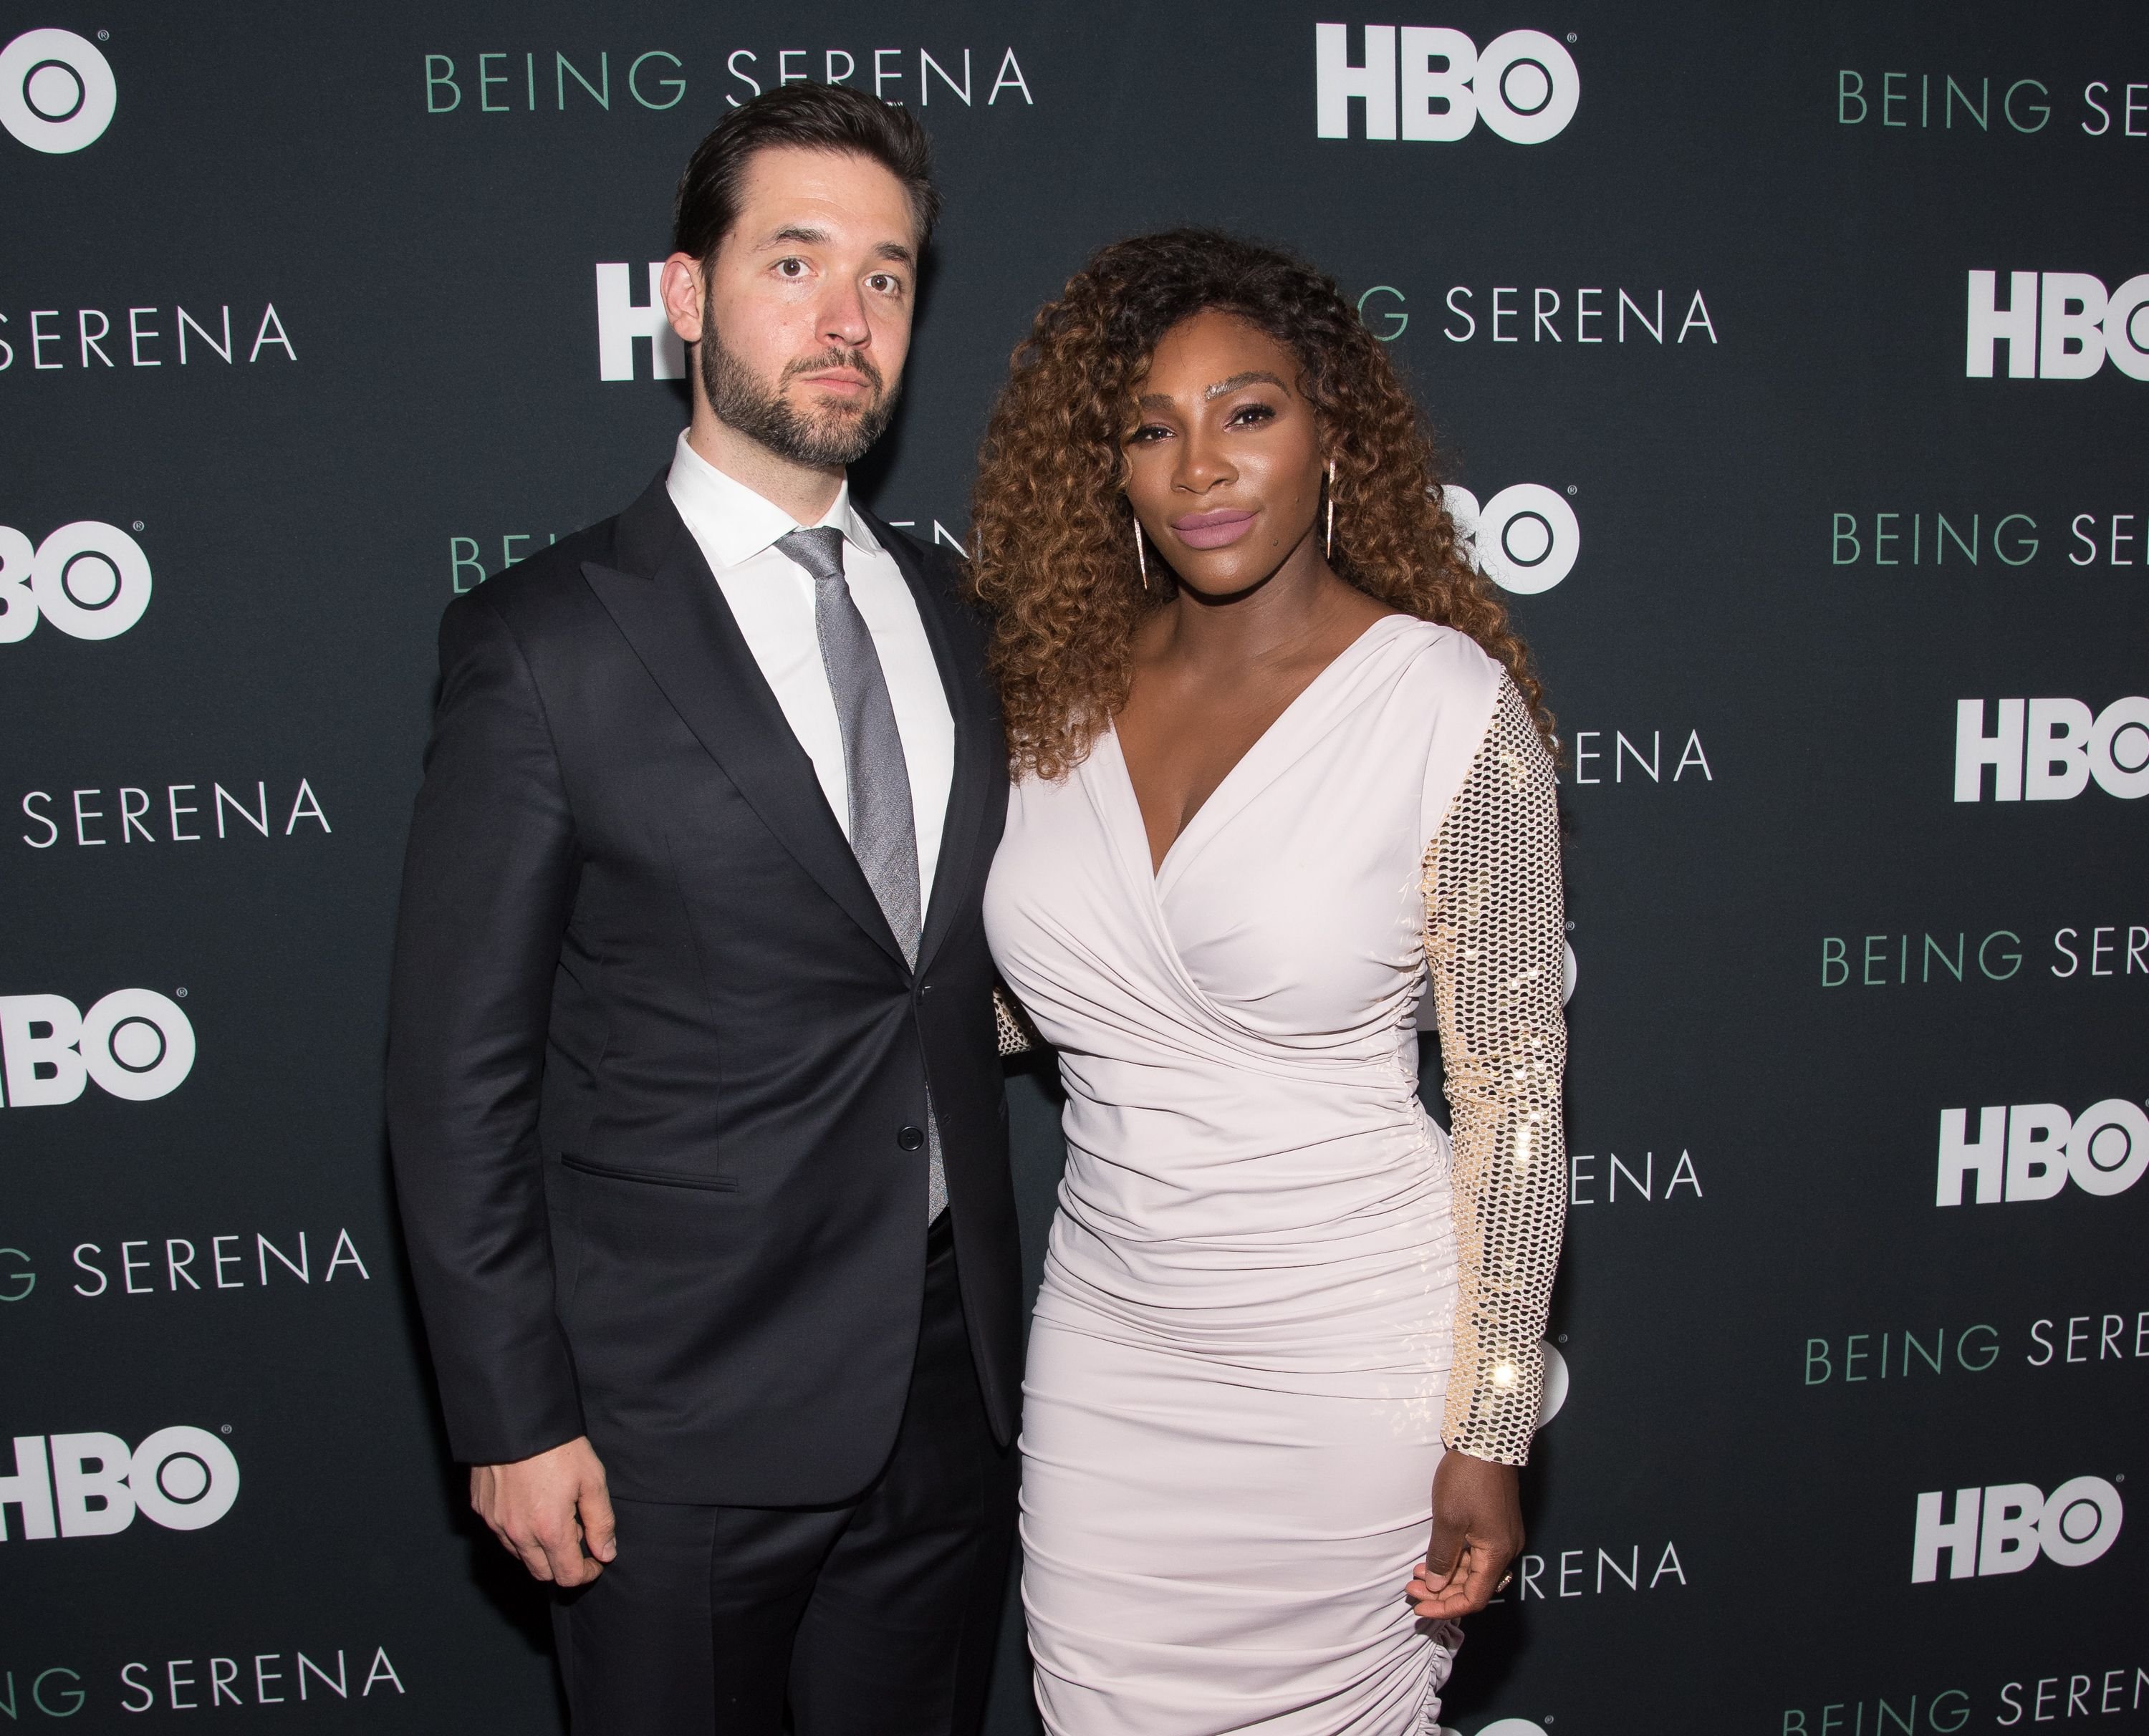 Serena Williams and Alexis Ohanian at the "Being Serena" New York premiere at Time Warner Center on April 25, 2018 | Photo: Getty Images